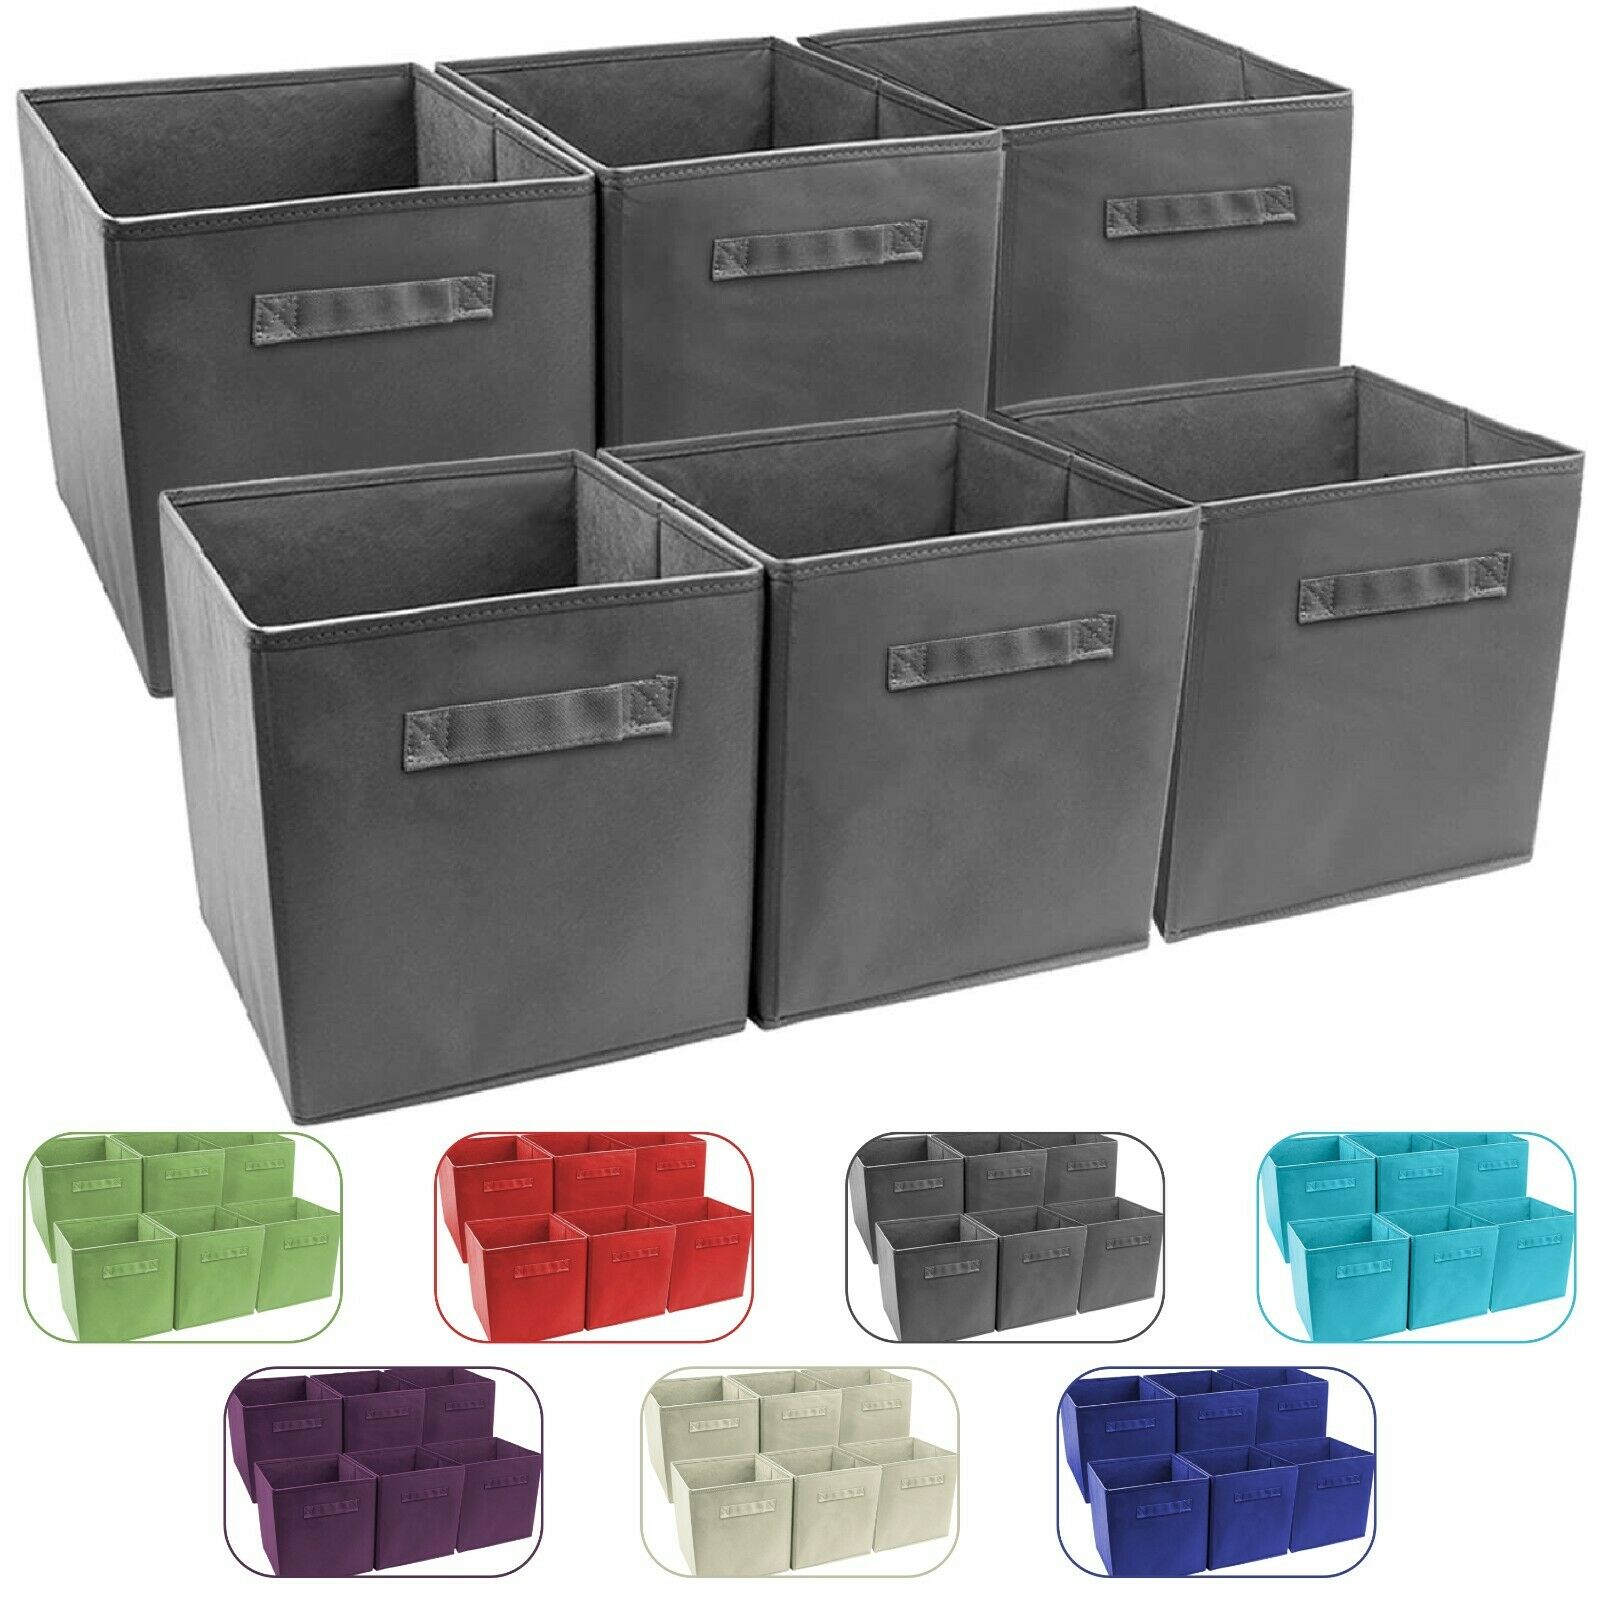 6 Foldable Storage Cube Basket Bin Cloth Baskets for Shelves, Cubby Organizers